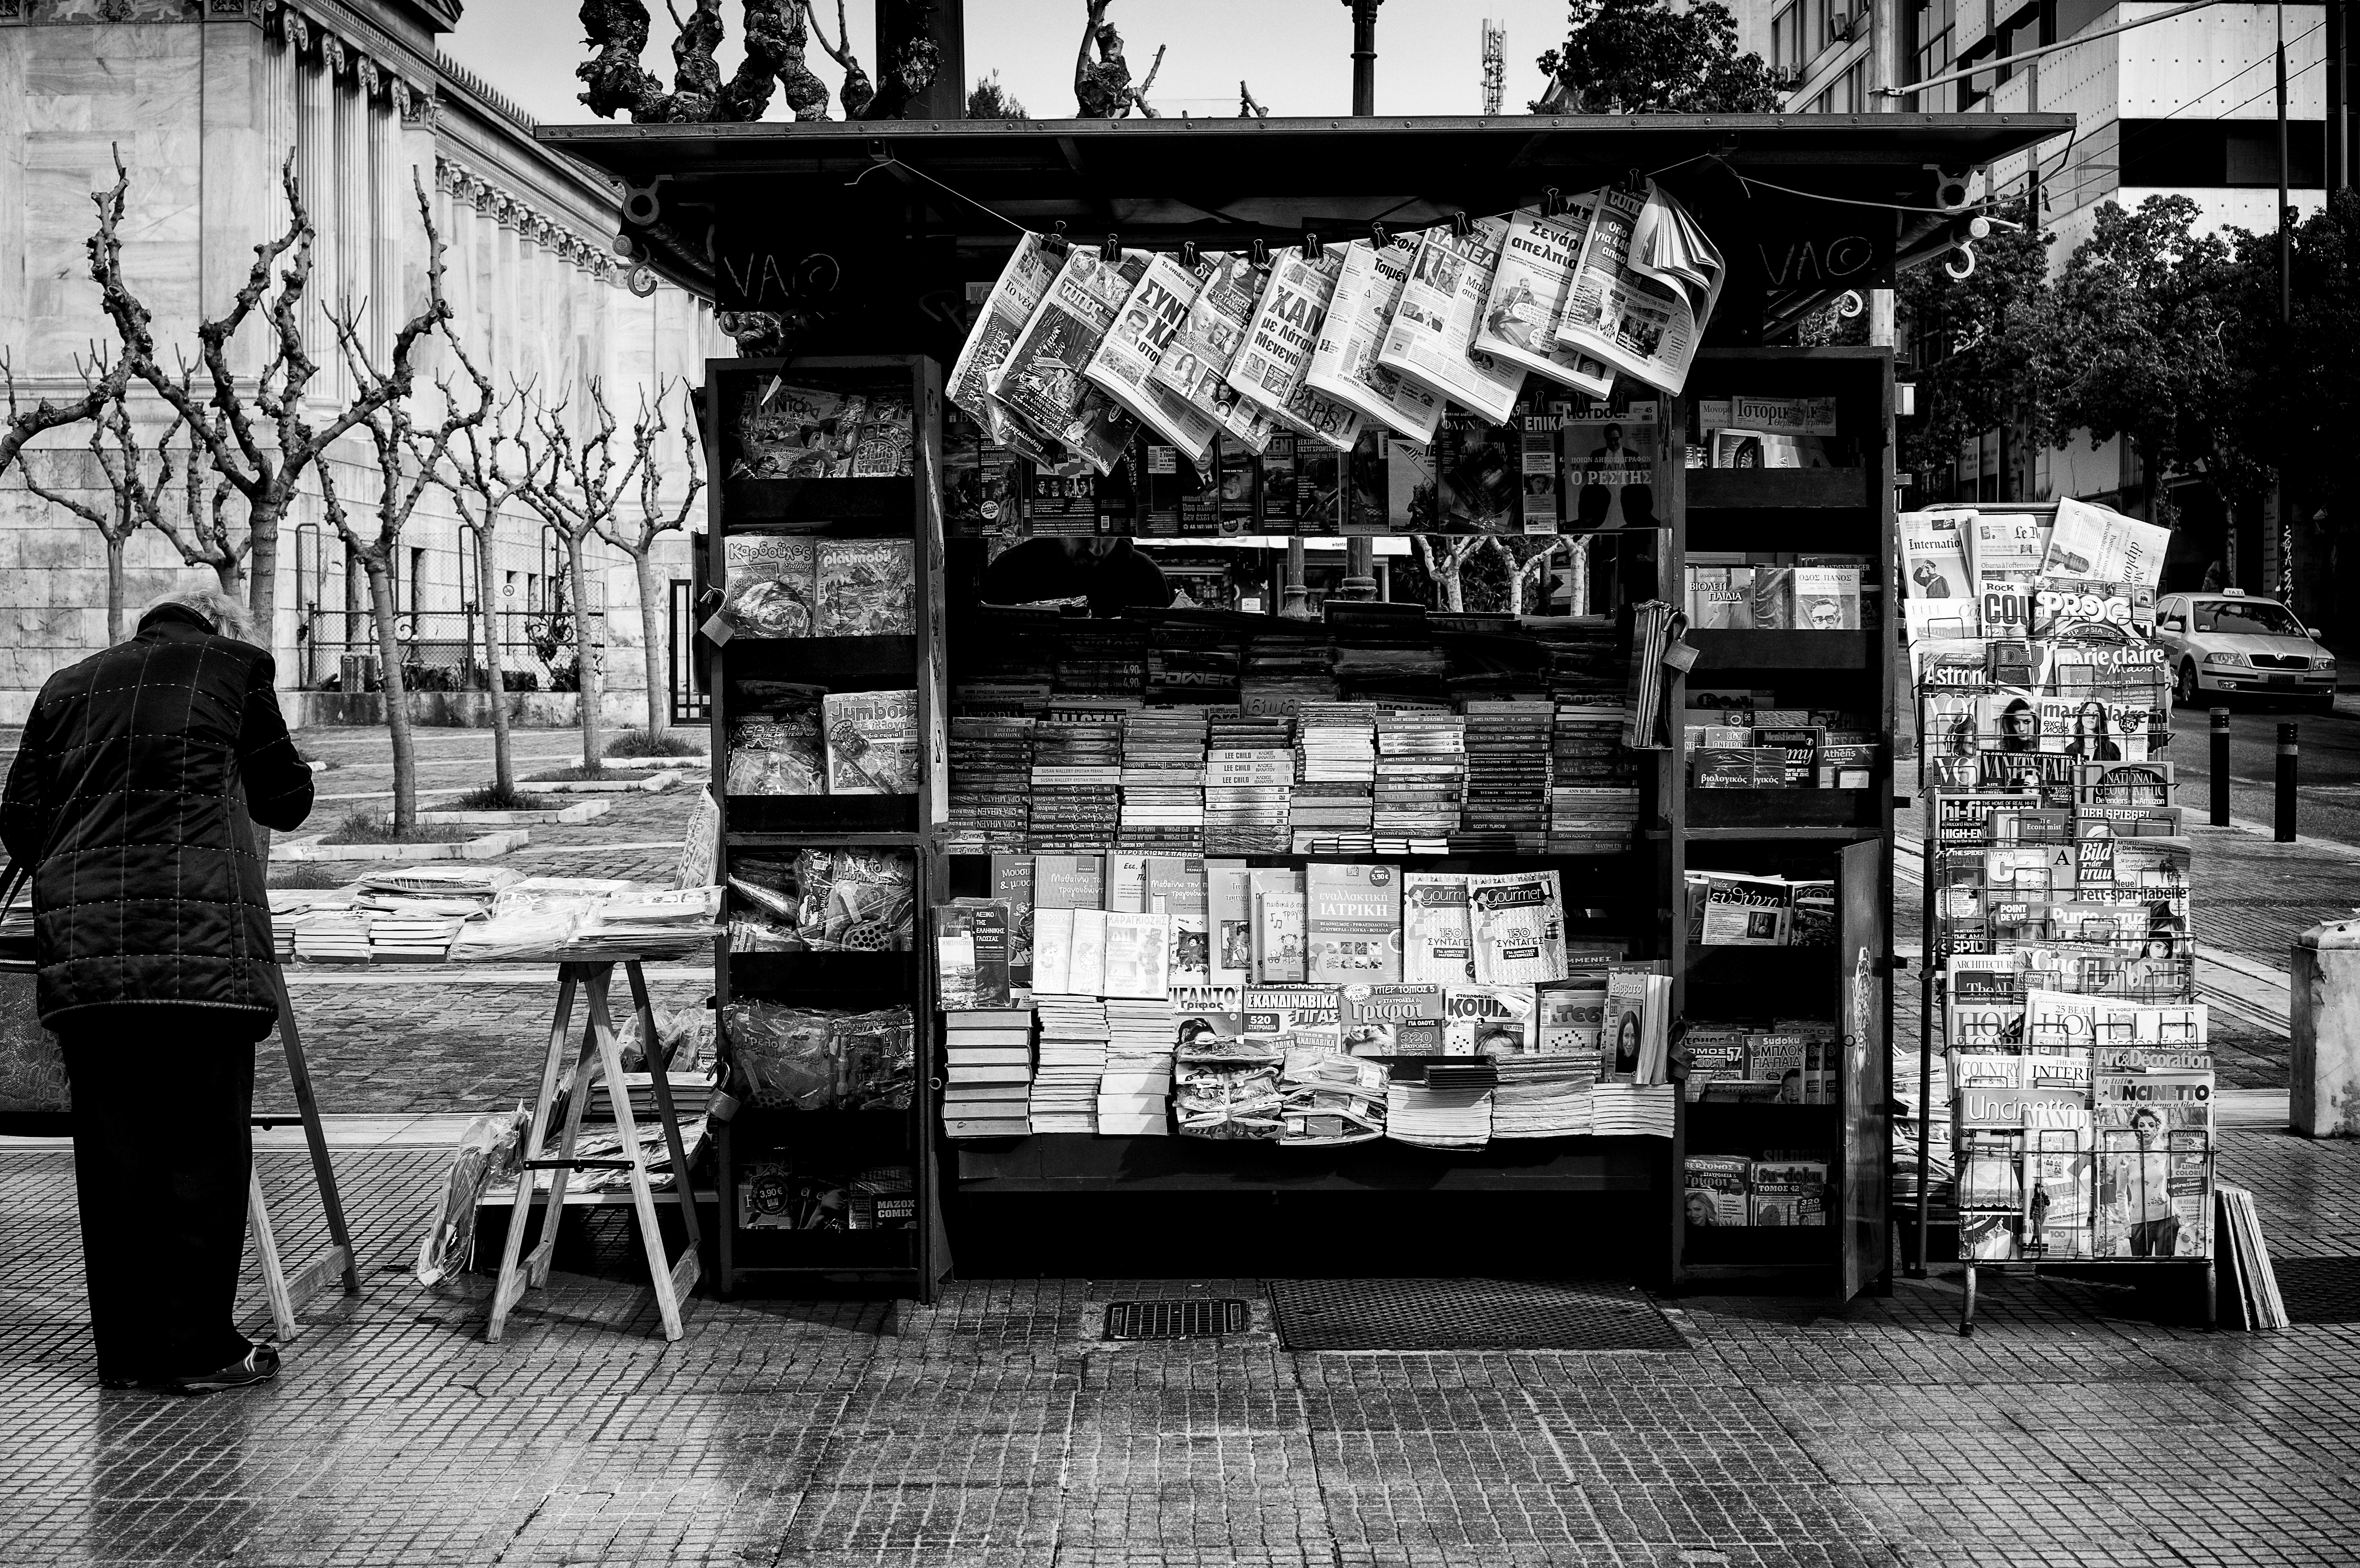 Magazines and Newspapers by Spyros Papaspyropoulos